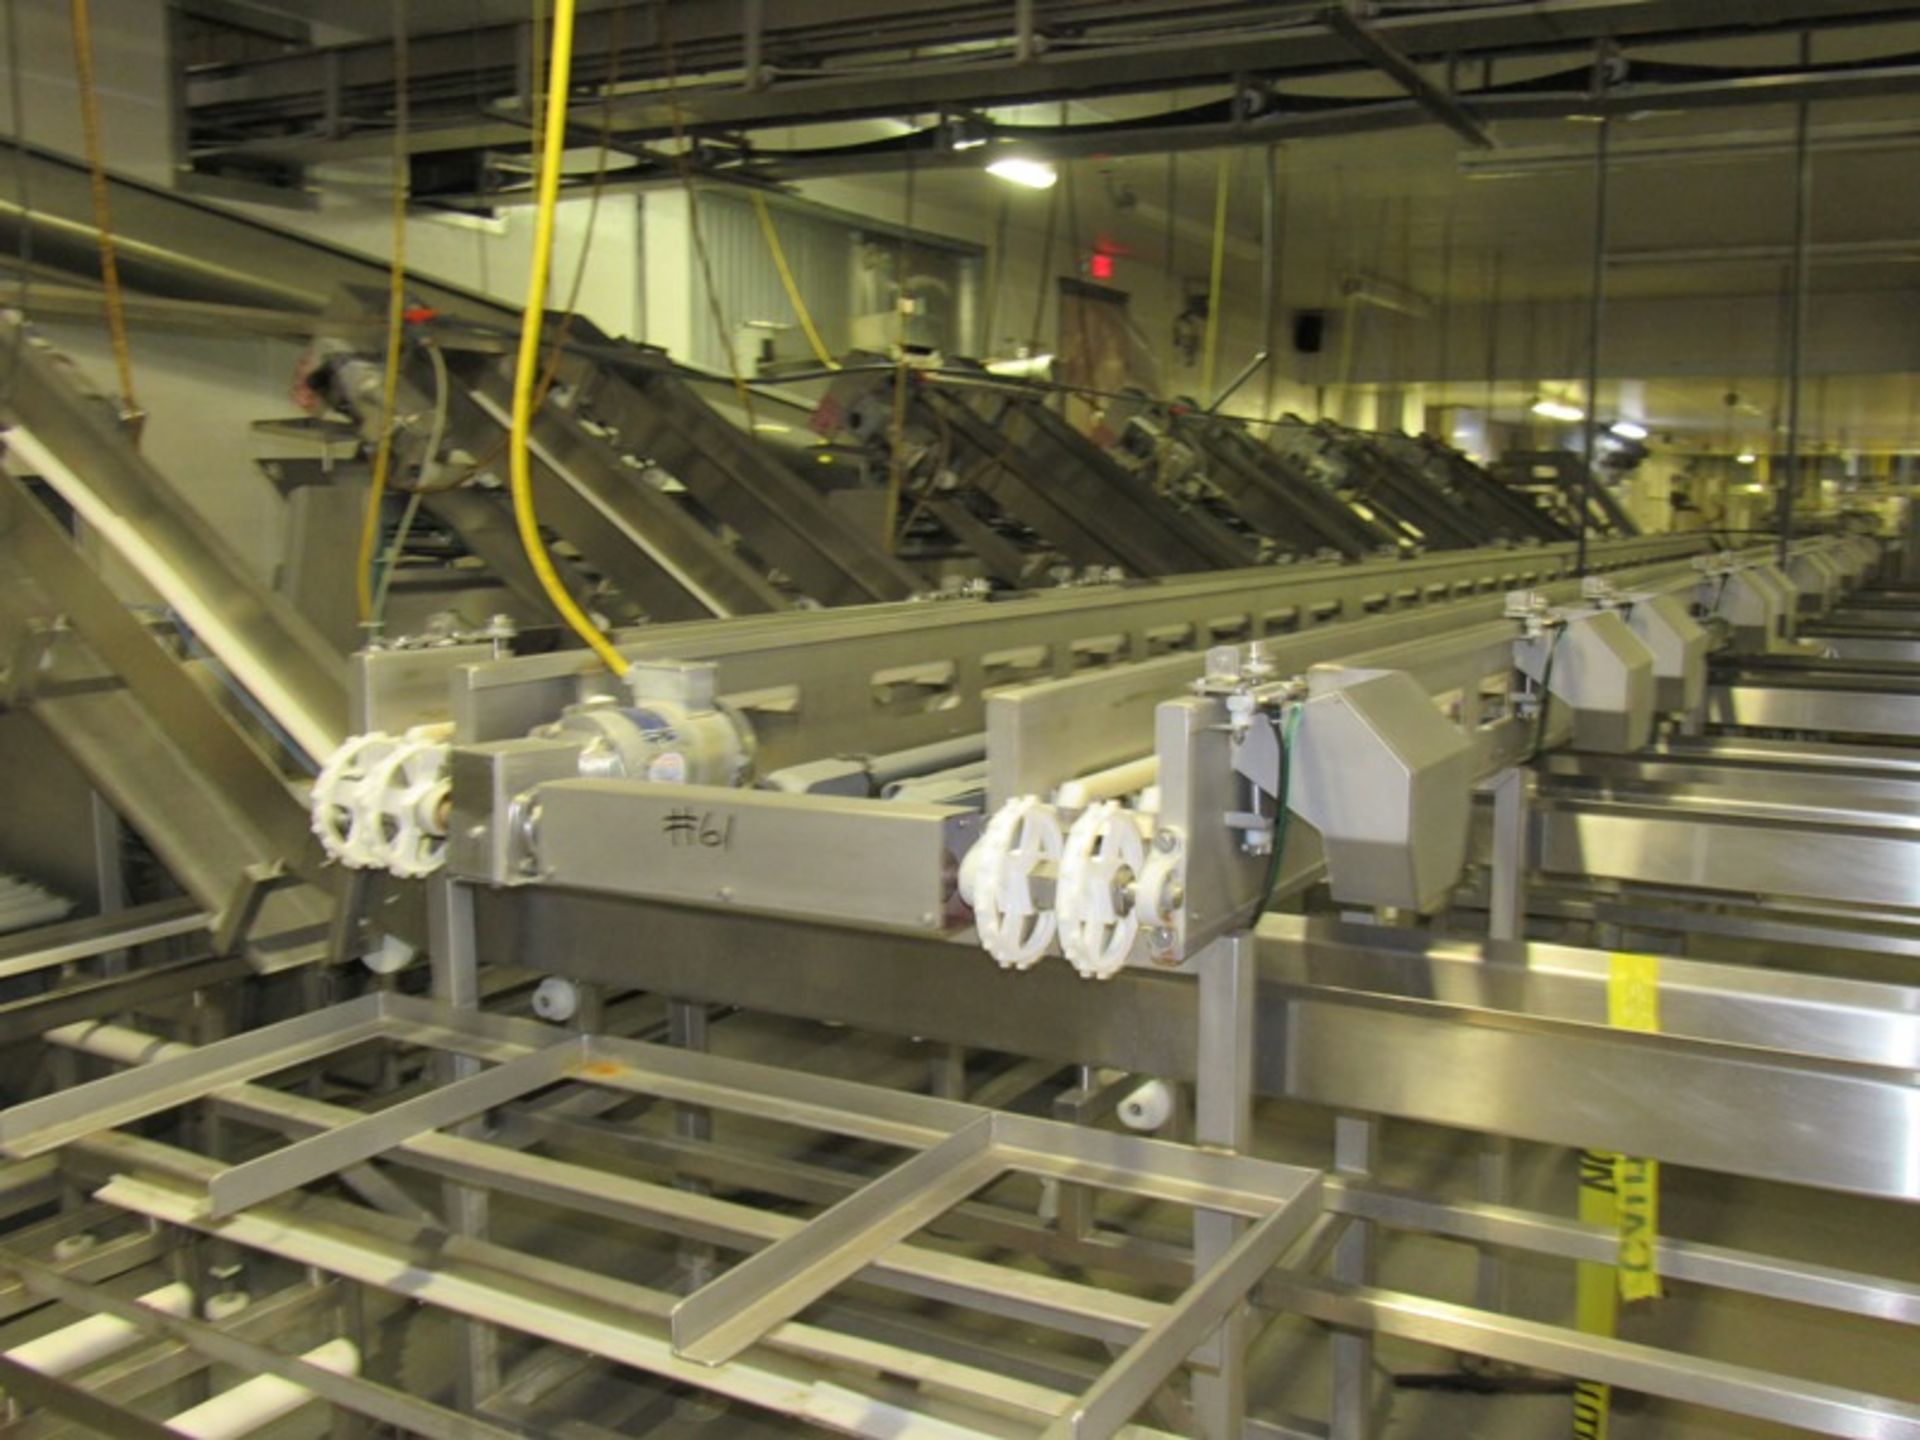 C.A.T. Stainless Steel Grading Line, dual lanes, 10 positions per lane, pneumatic drop chutes, - Image 16 of 18